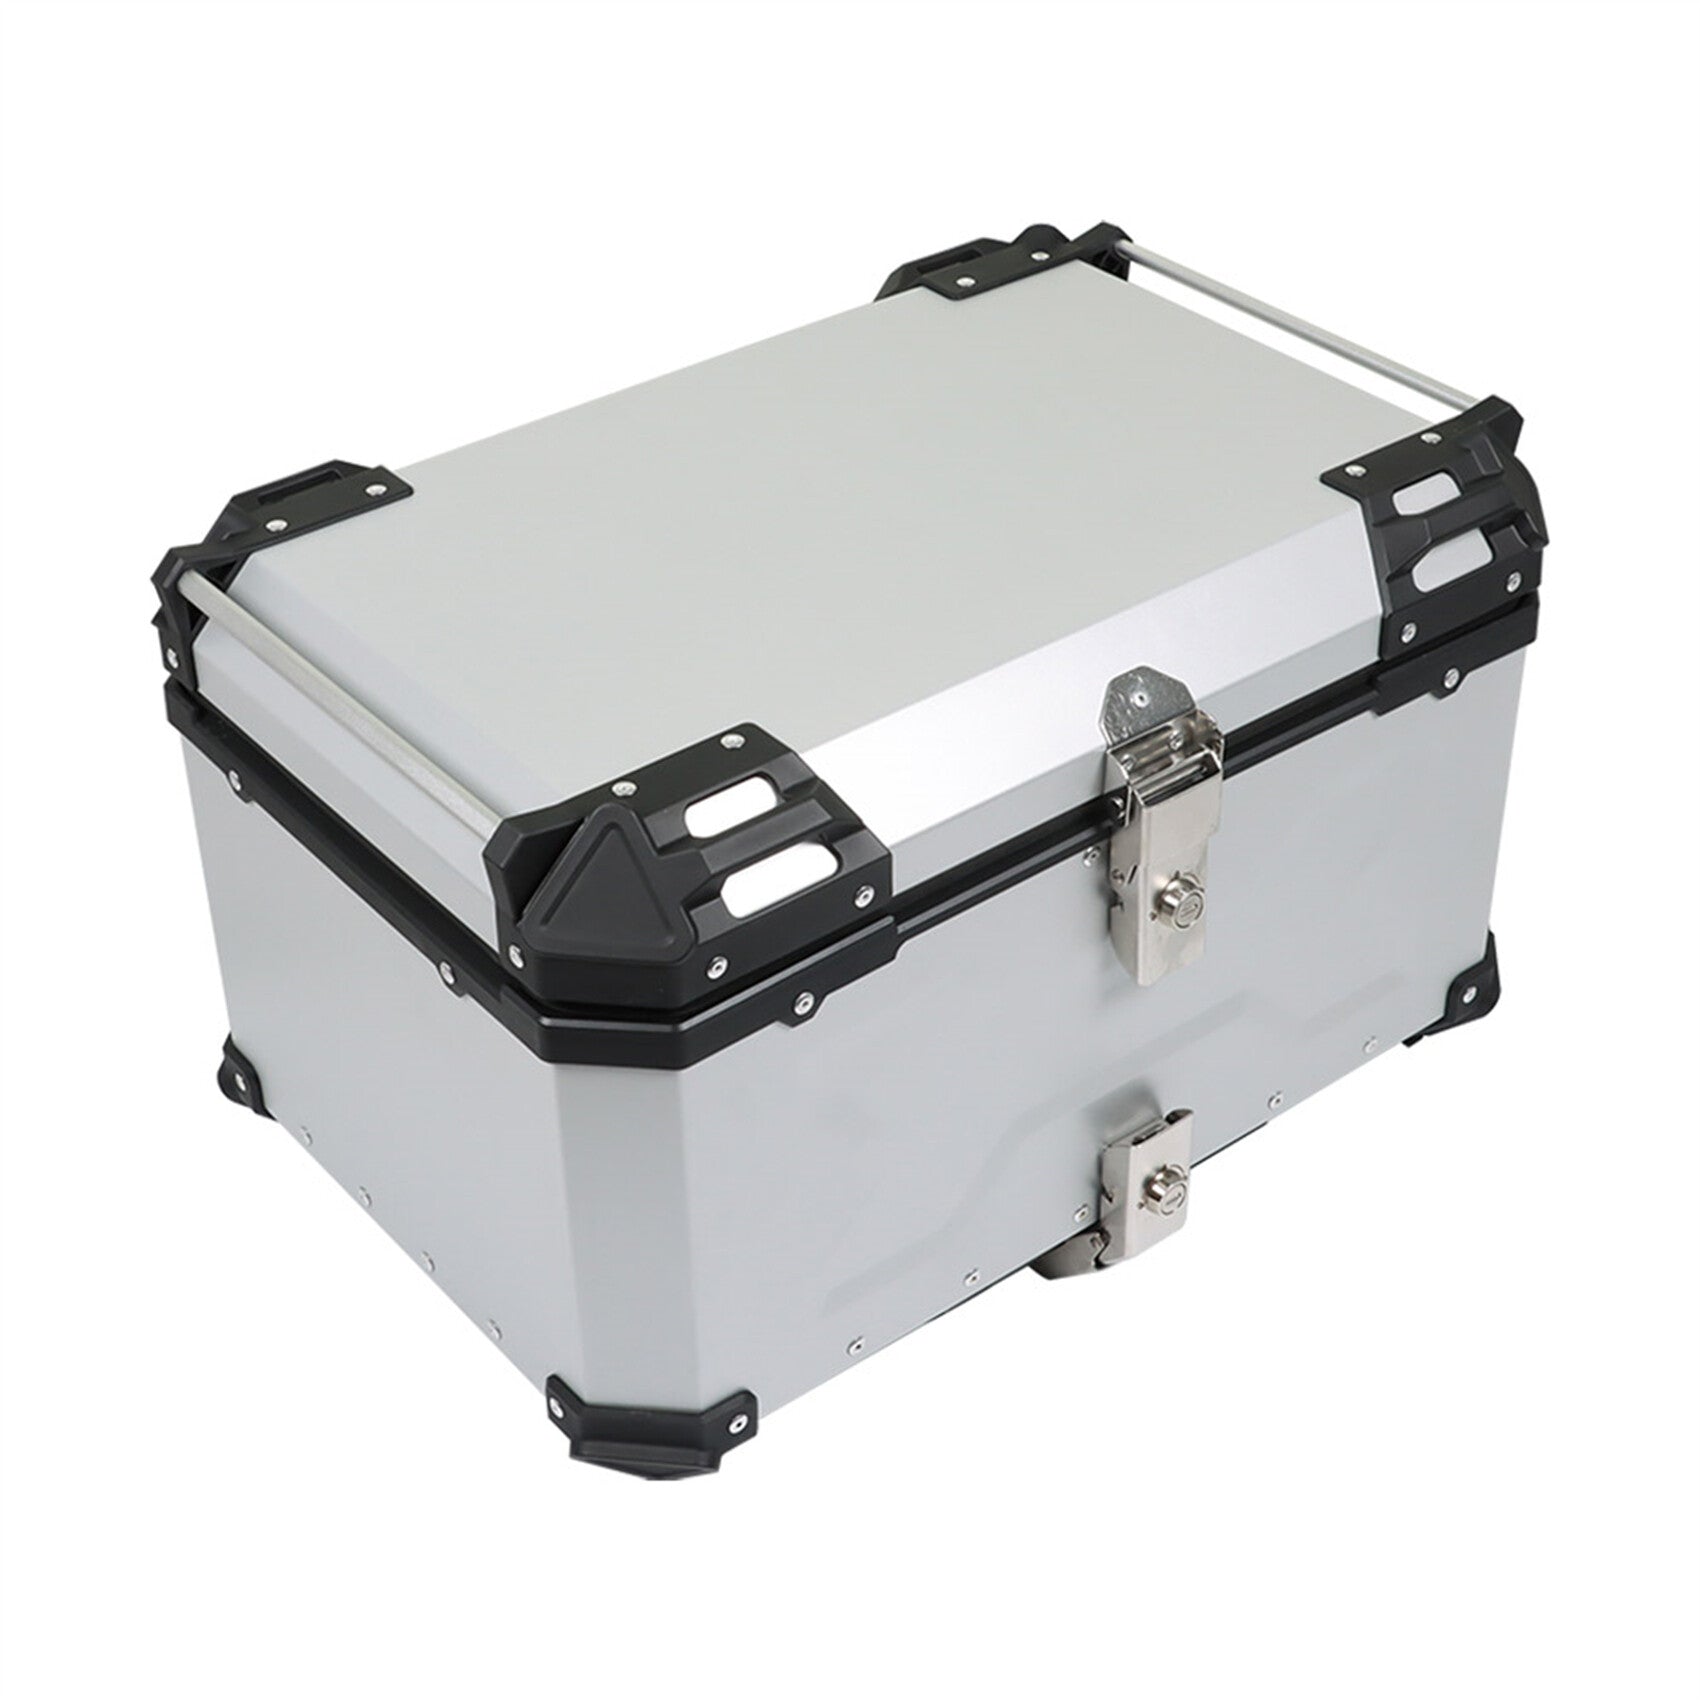 labwork 65L Motorcycle Top Case Tail Box with Backrest and Mounting Plate Hard Aluminum Alloy Watertightness Security Lock Against Theft Silver Metal Motorcycle Trunk Tour Tail Box